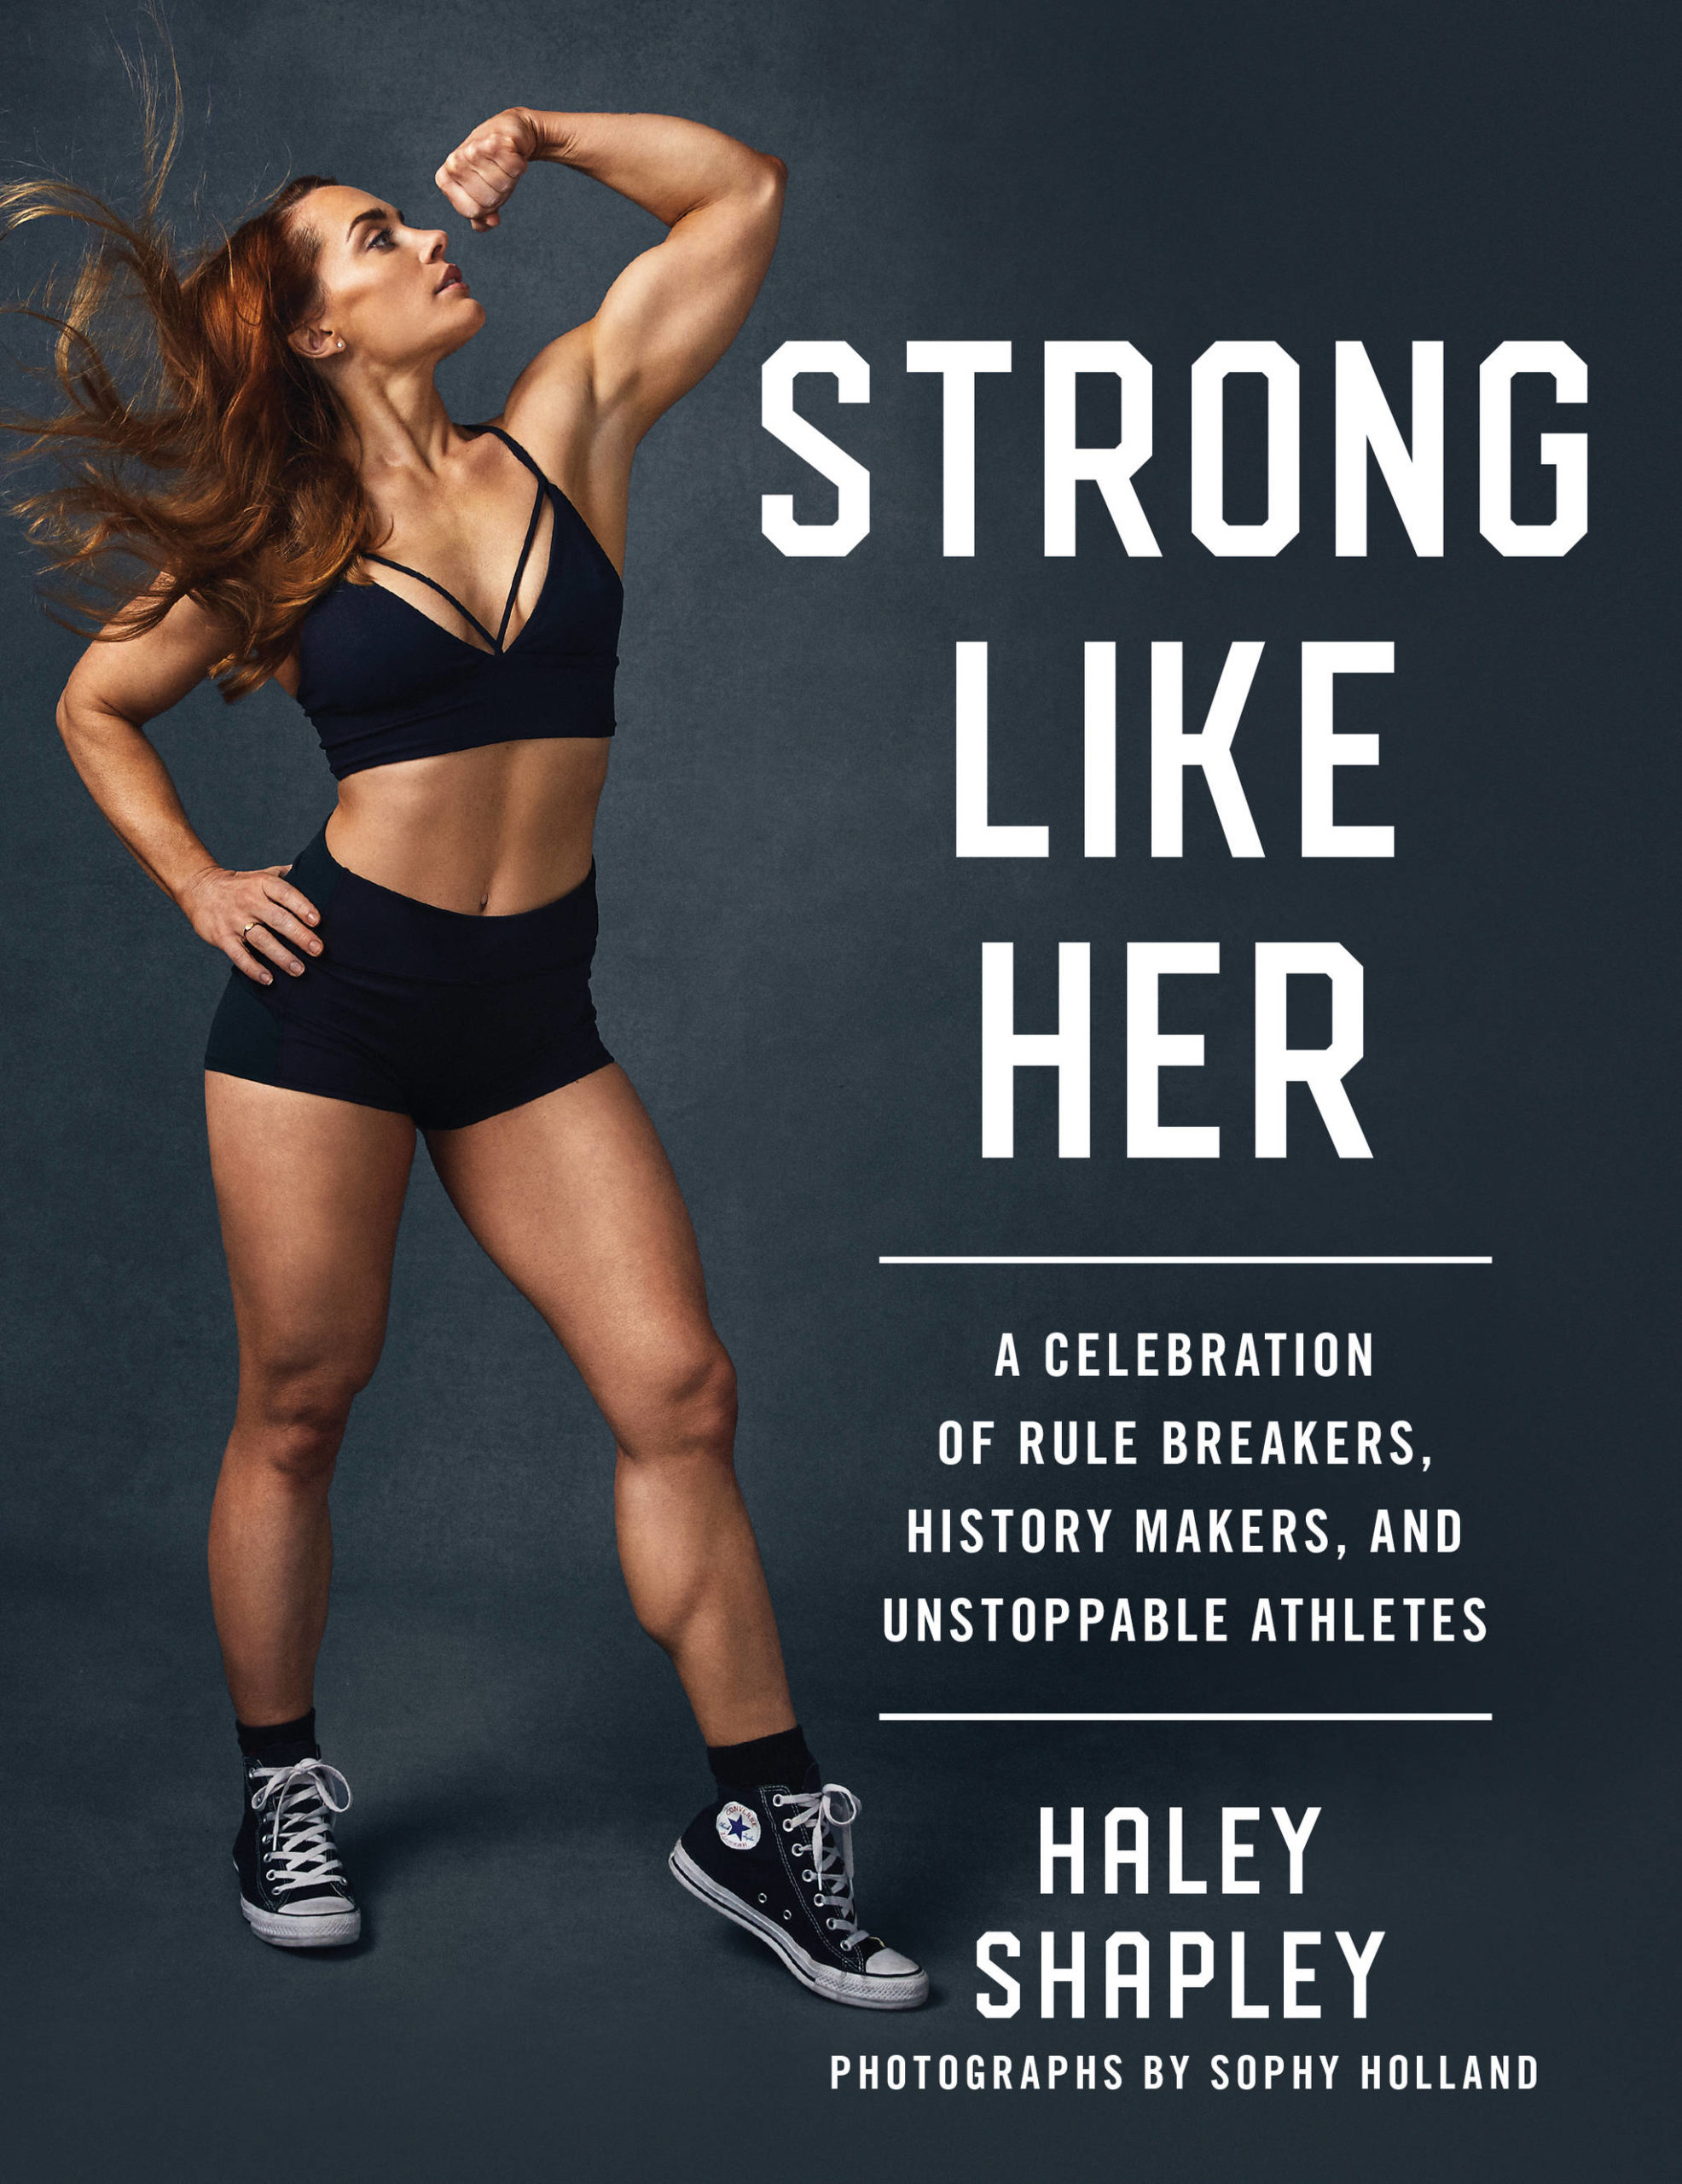 “Strong Like Her” features American powerlifter Megan Gallagher on the cover.